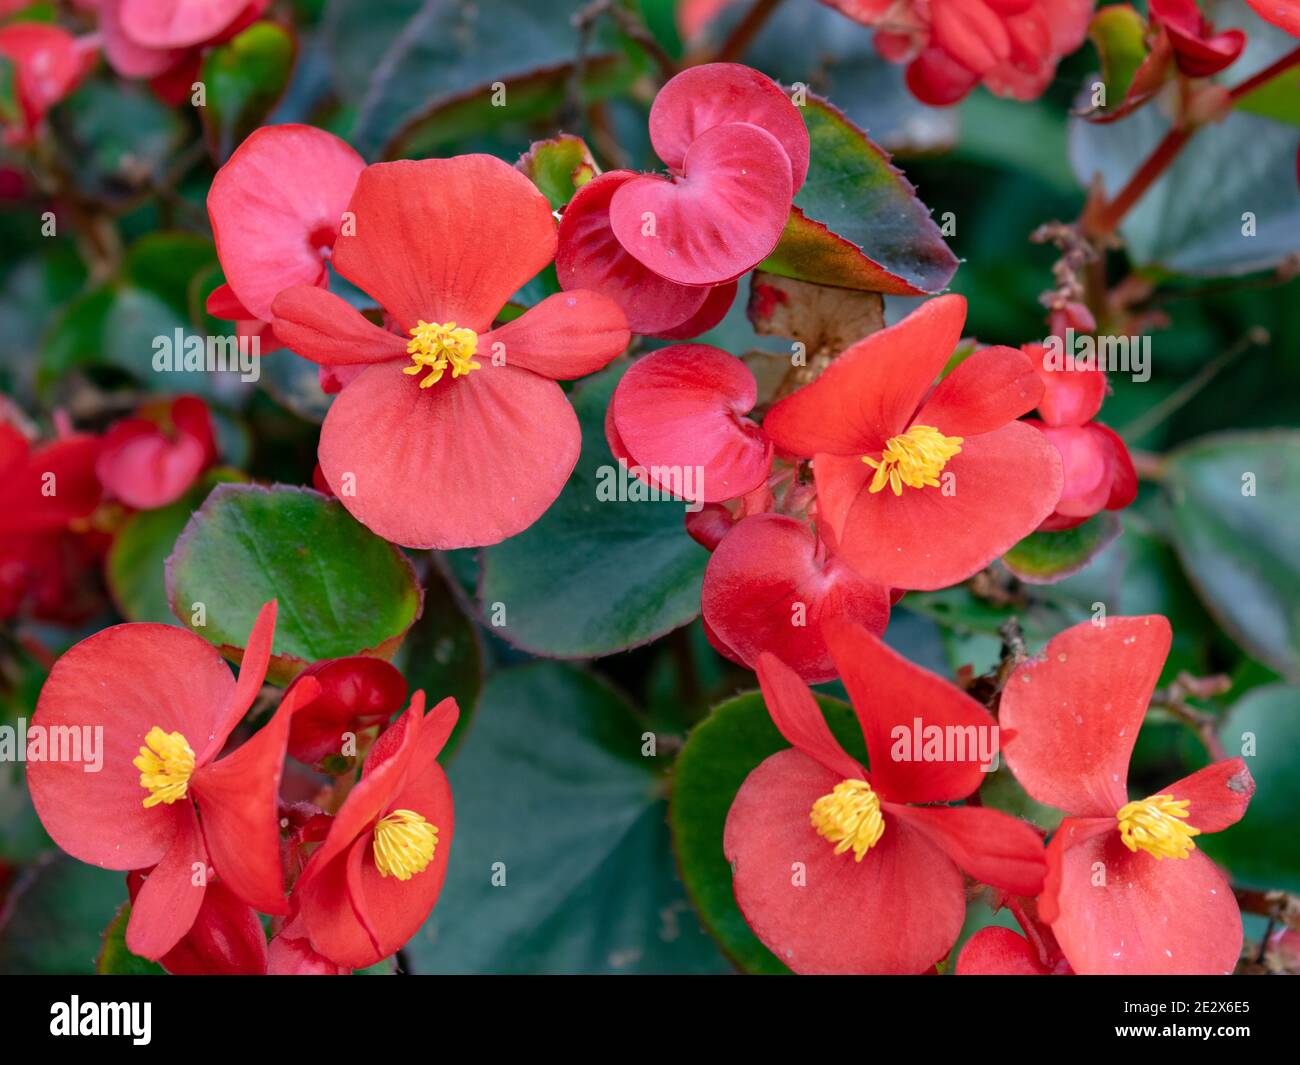 Red wax begonia (Begonia cucullata) also known as clubed begonia, closeup, selective focus and full frame Stock Photo